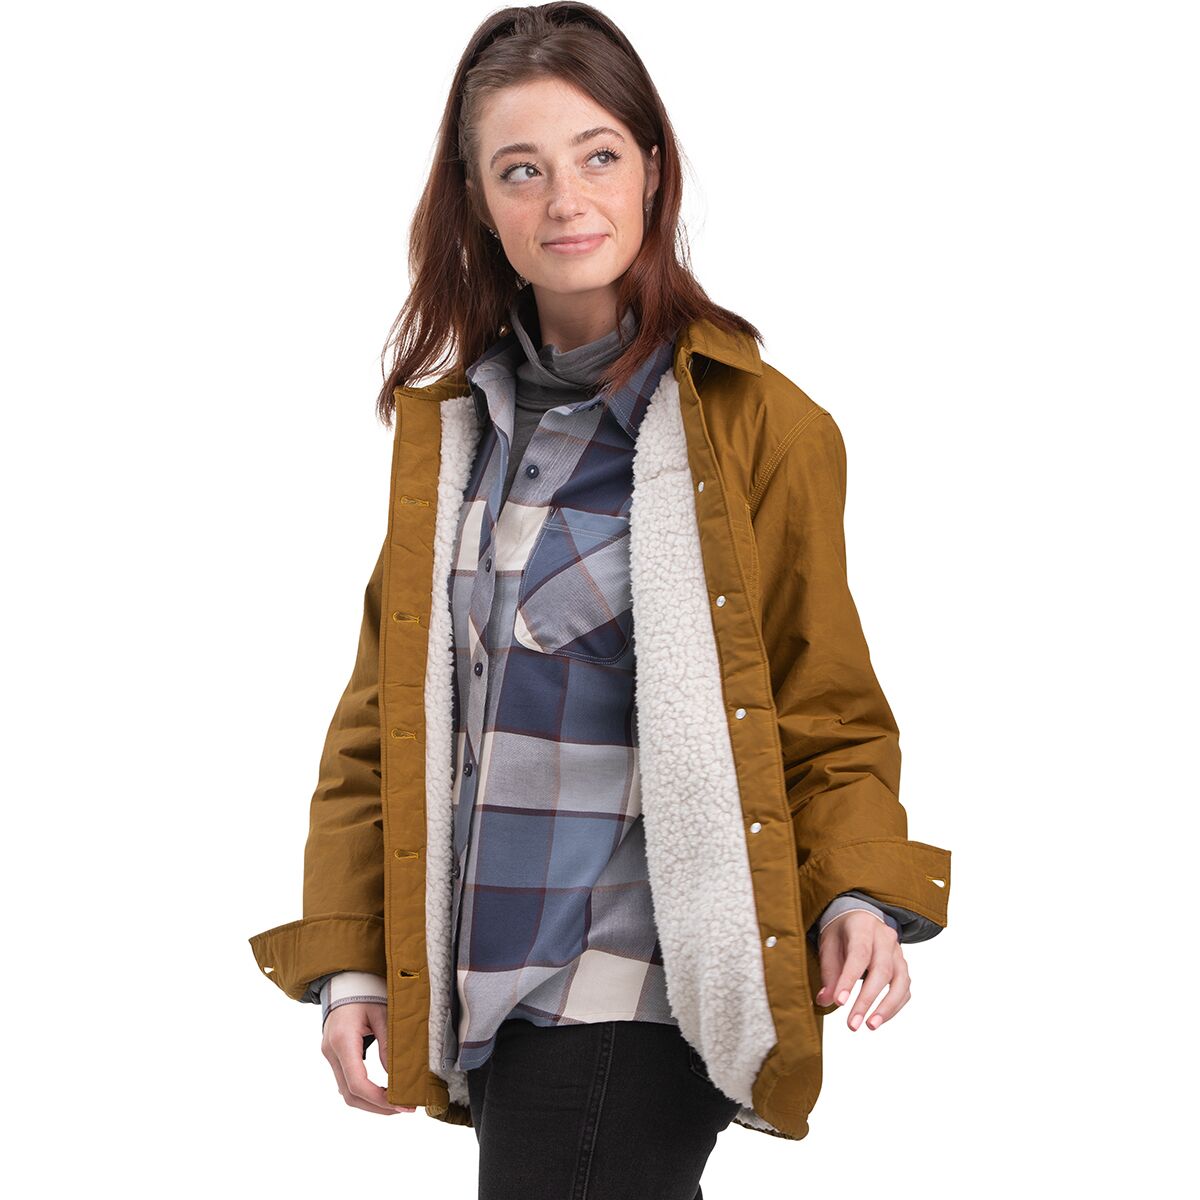 Outdoor Research Lined Chore Jacket - Women's